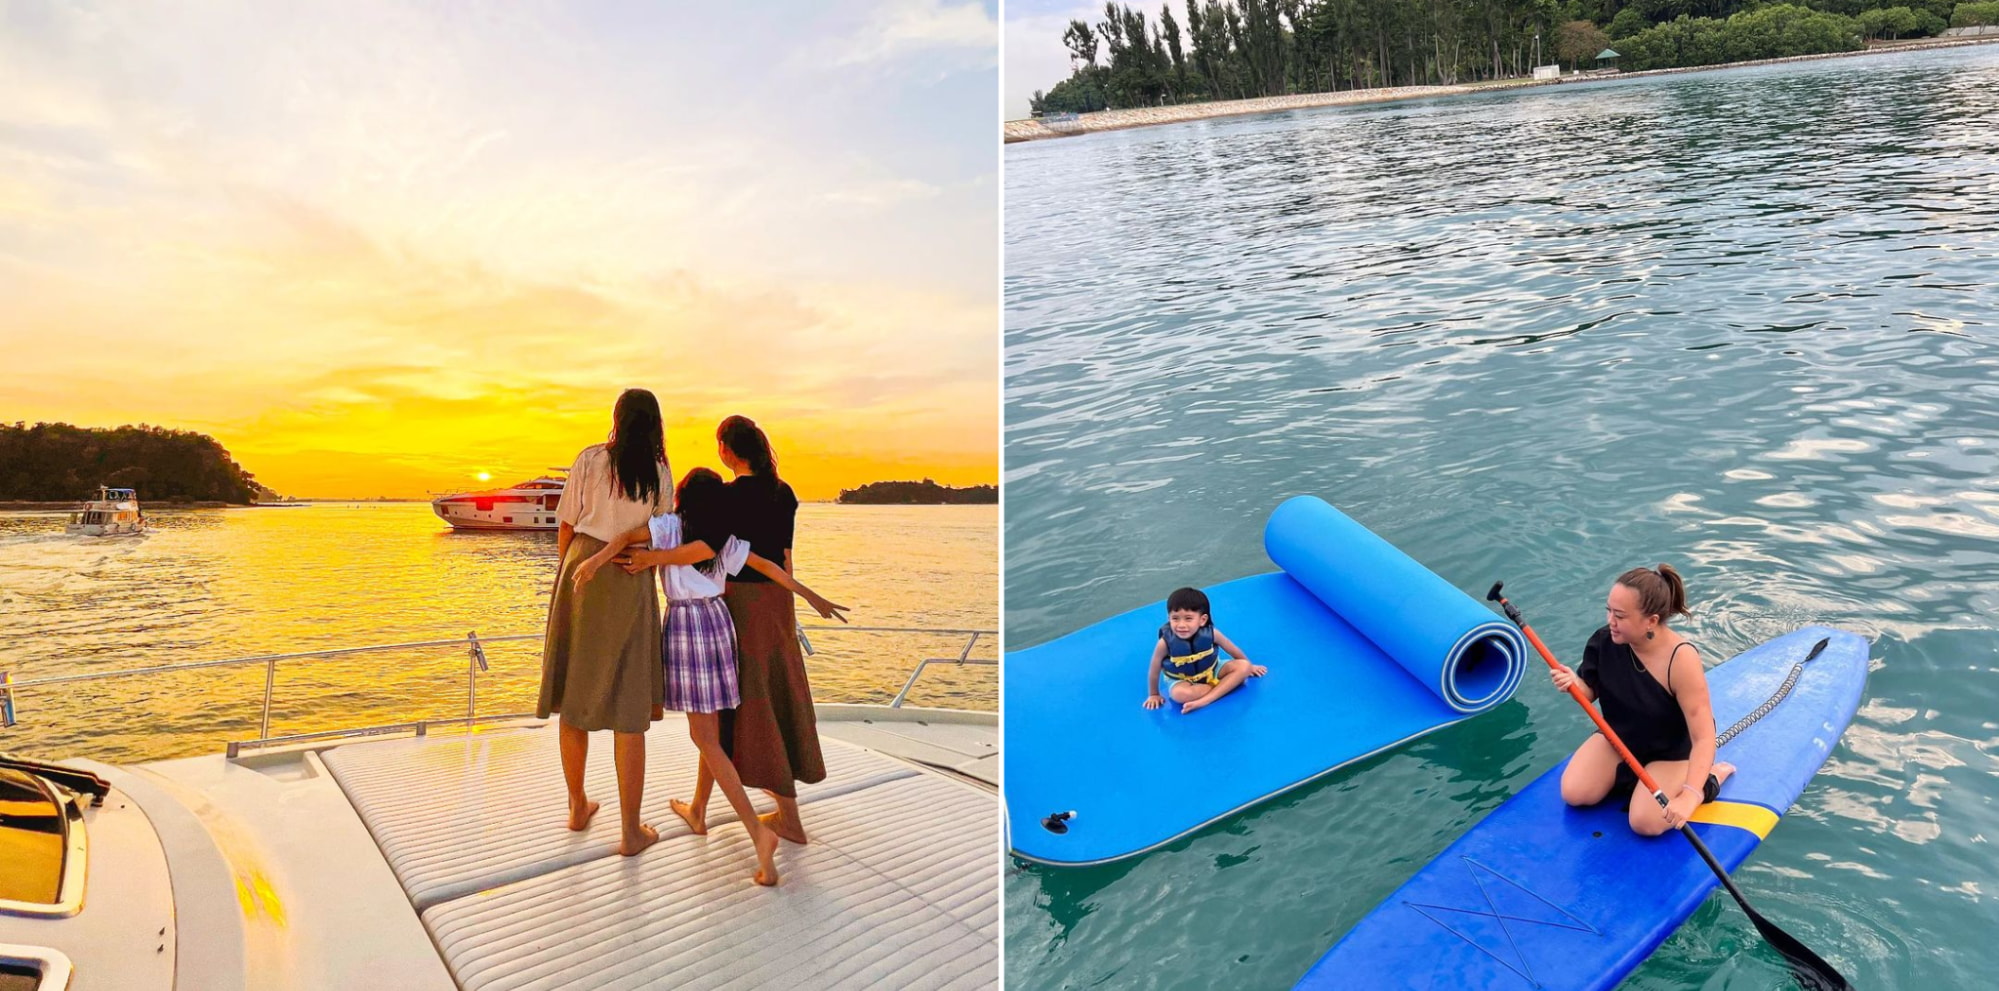 2 women and a girl on a yacht, a child on a floating mat, and a woman on an SUP paddling board at lazarus island